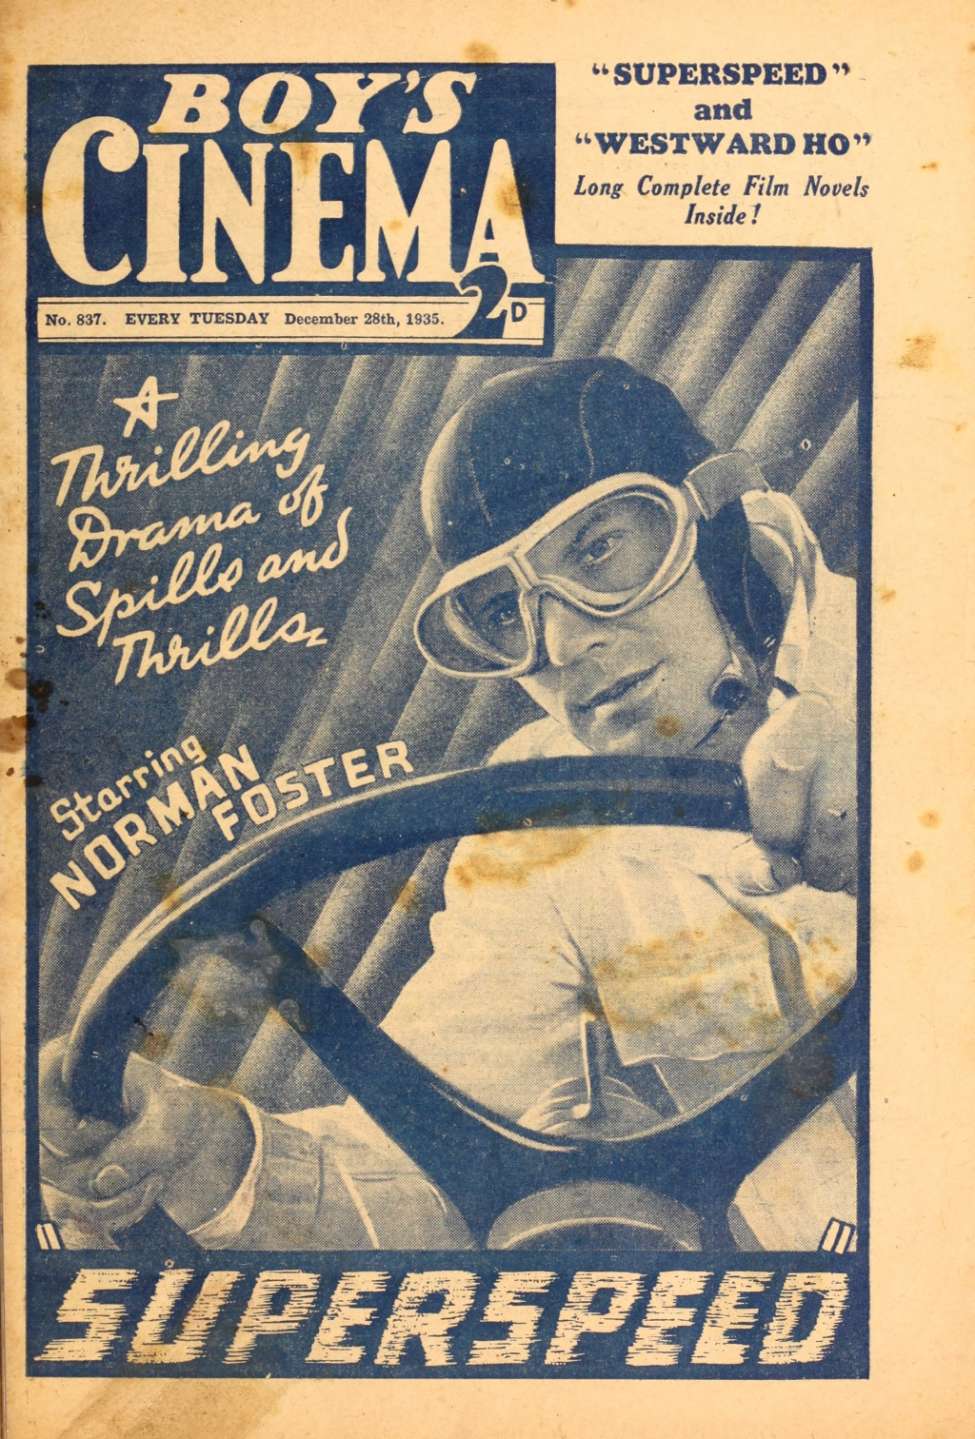 Comic Book Cover For Boy's Cinema 837 - Superspeed - Norman Foster